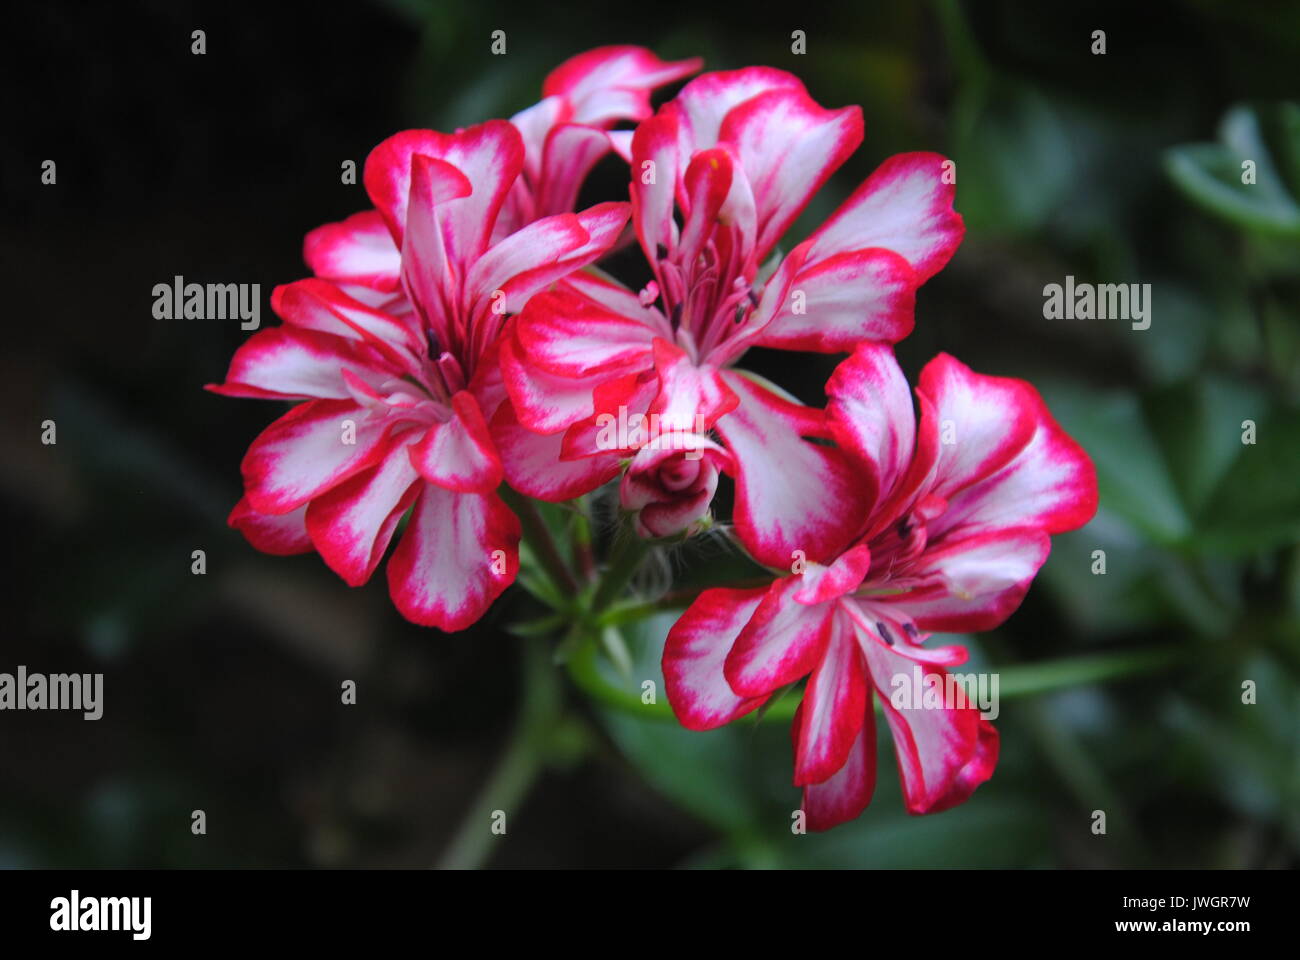 A bright pink flower sitting in the sun light Stock Photo